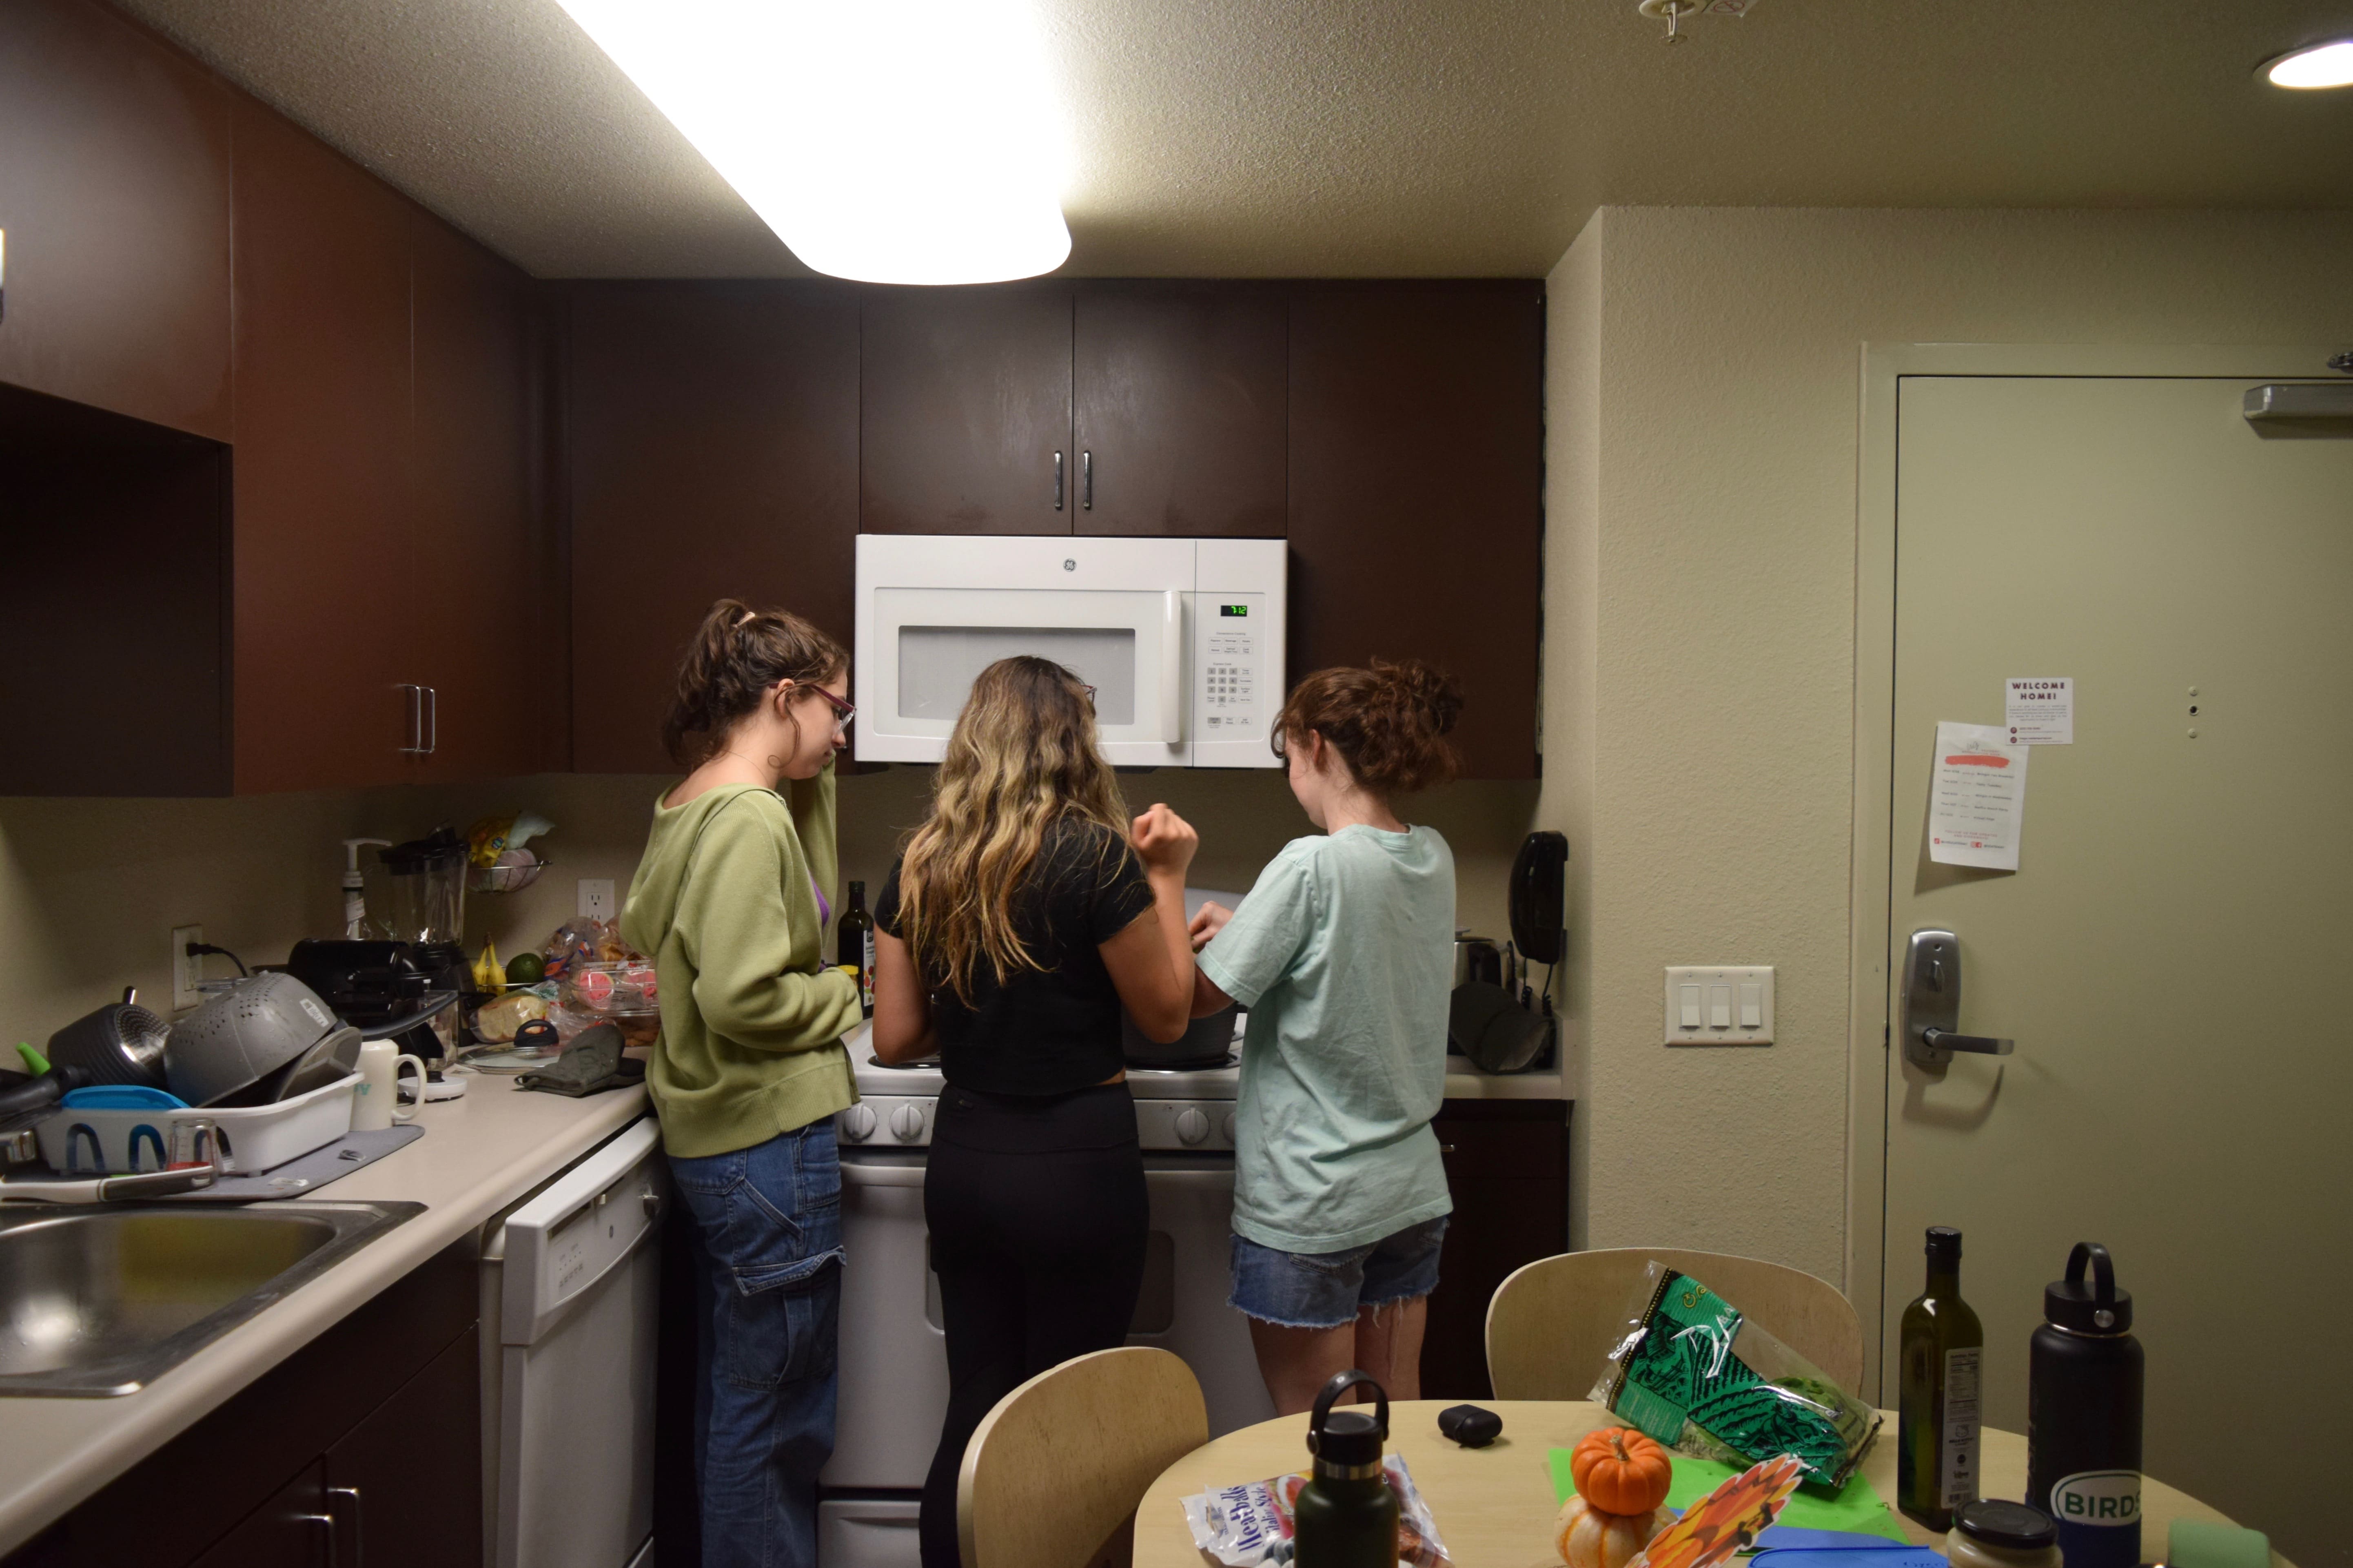 Friends crowded in the kitchen